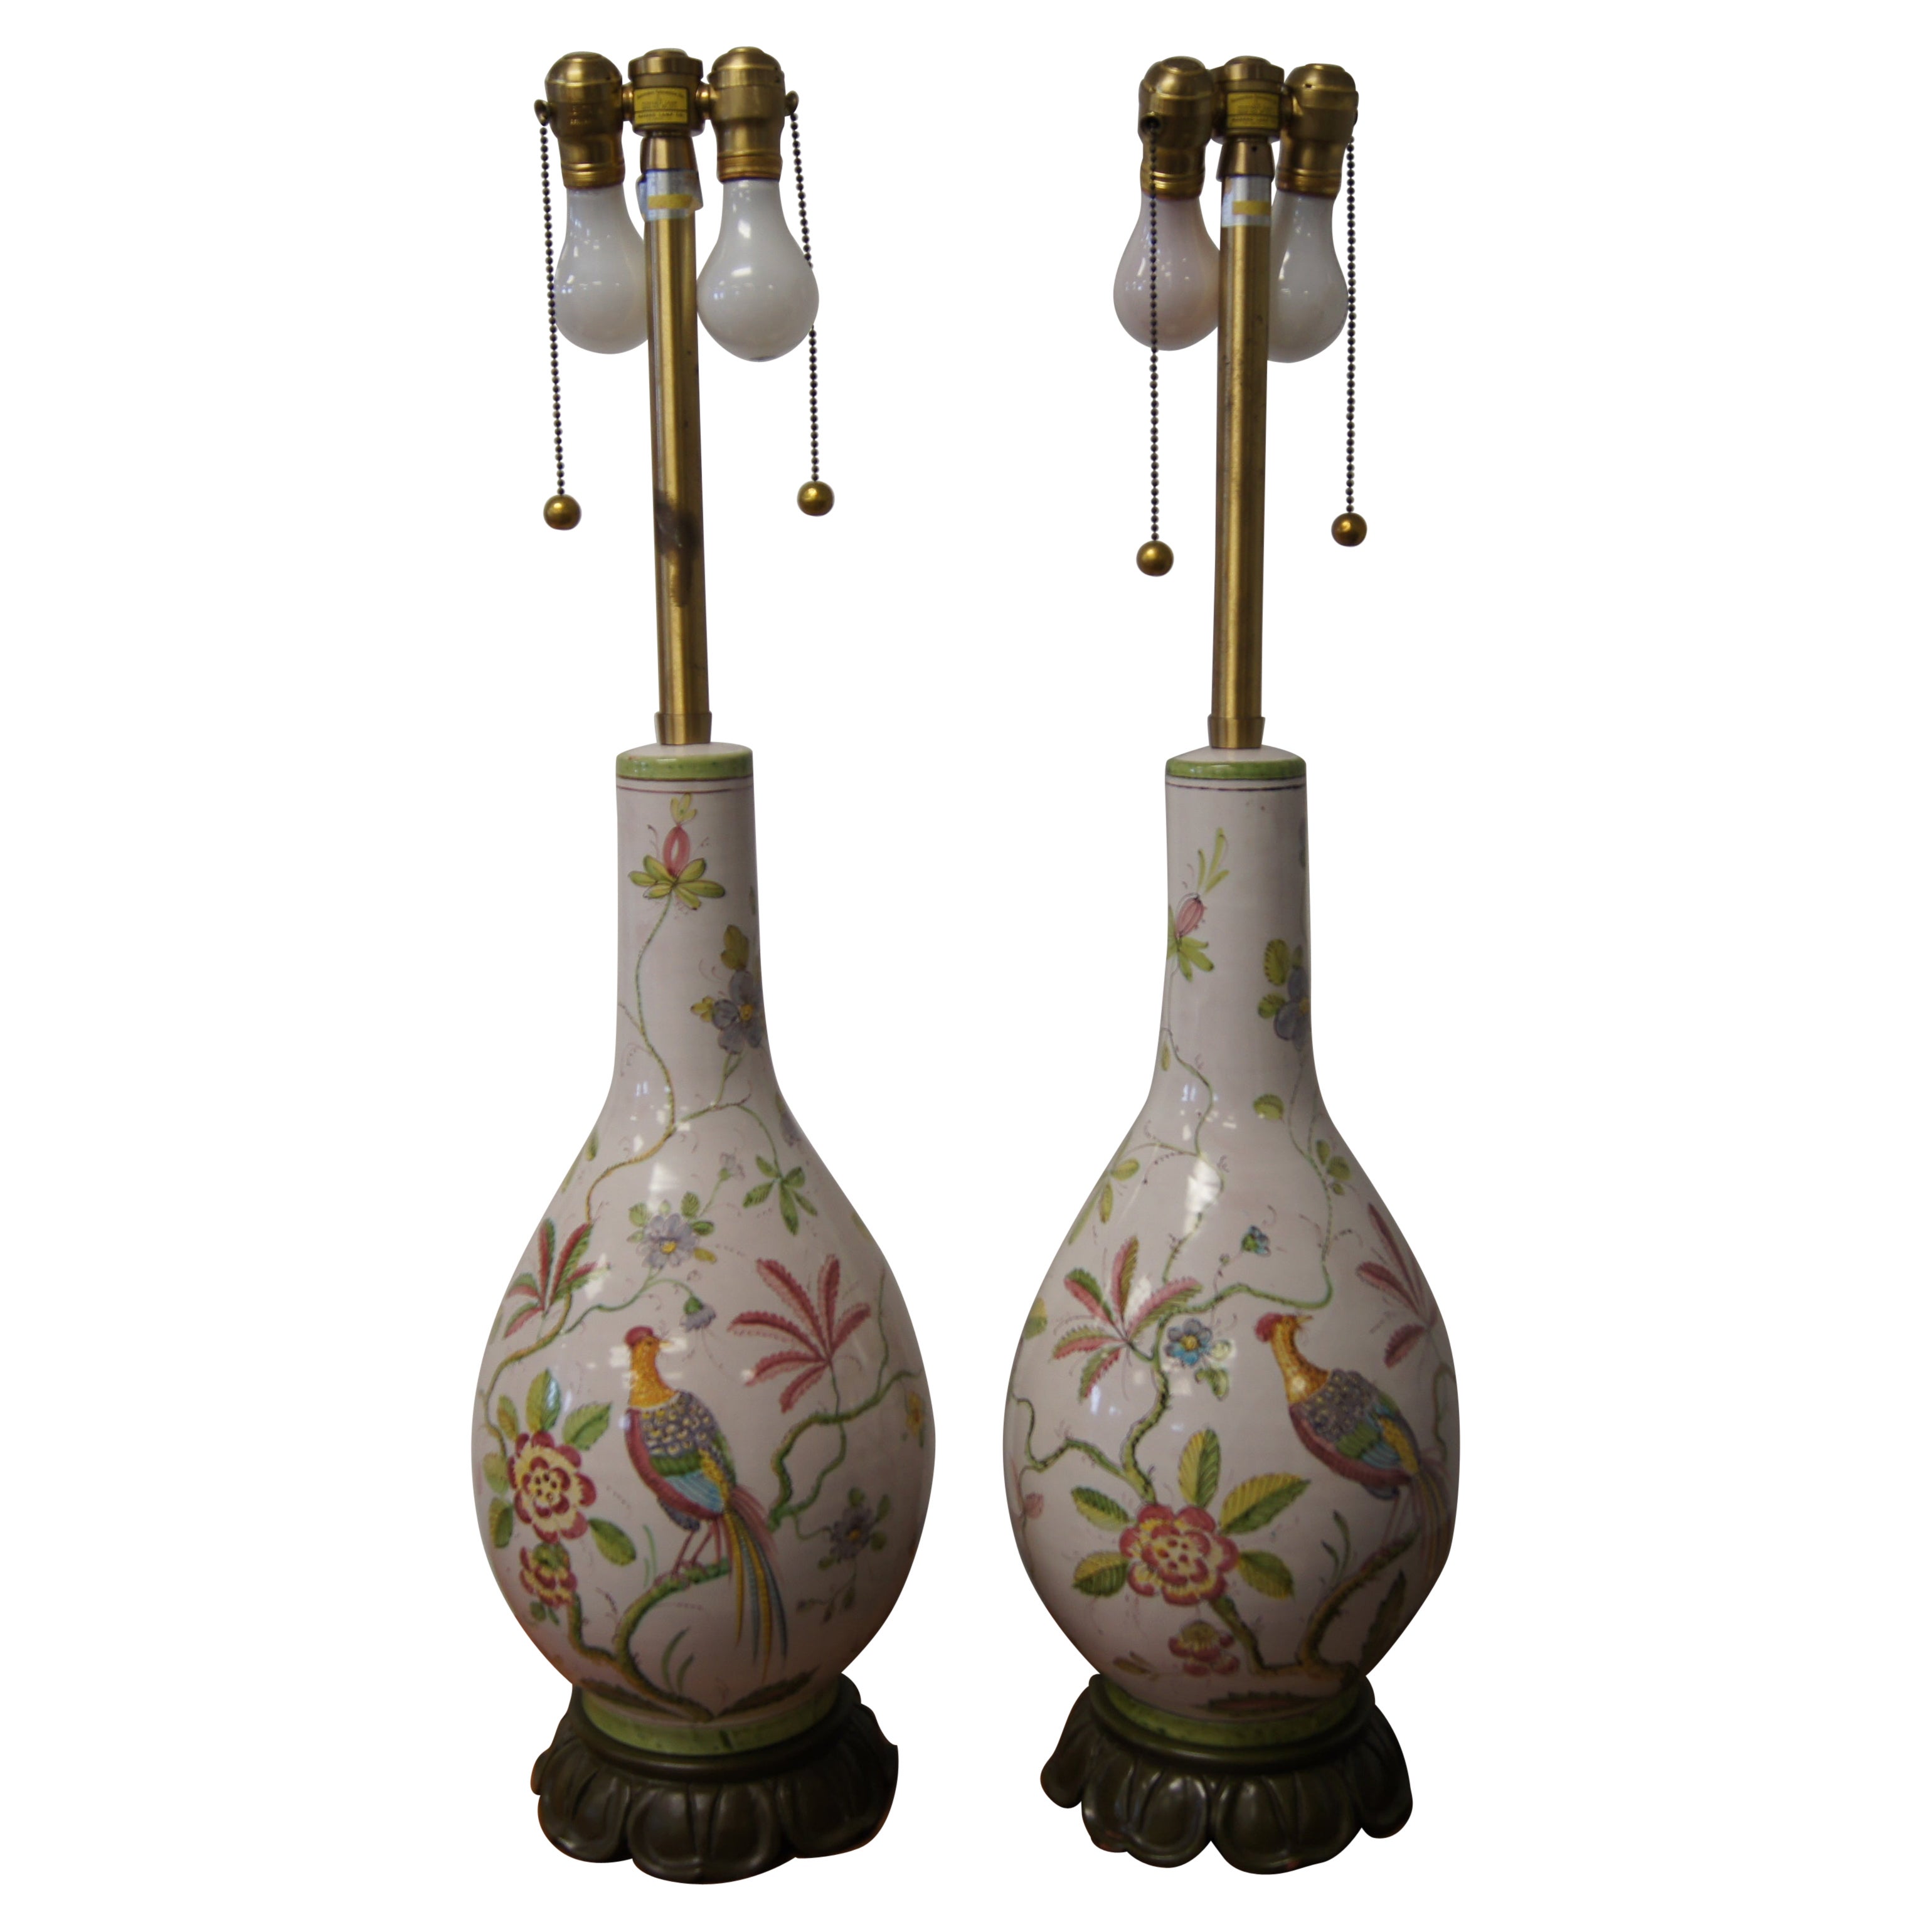 Pair of Decorative Table Lamps by Marbro with Pheasant and Flora